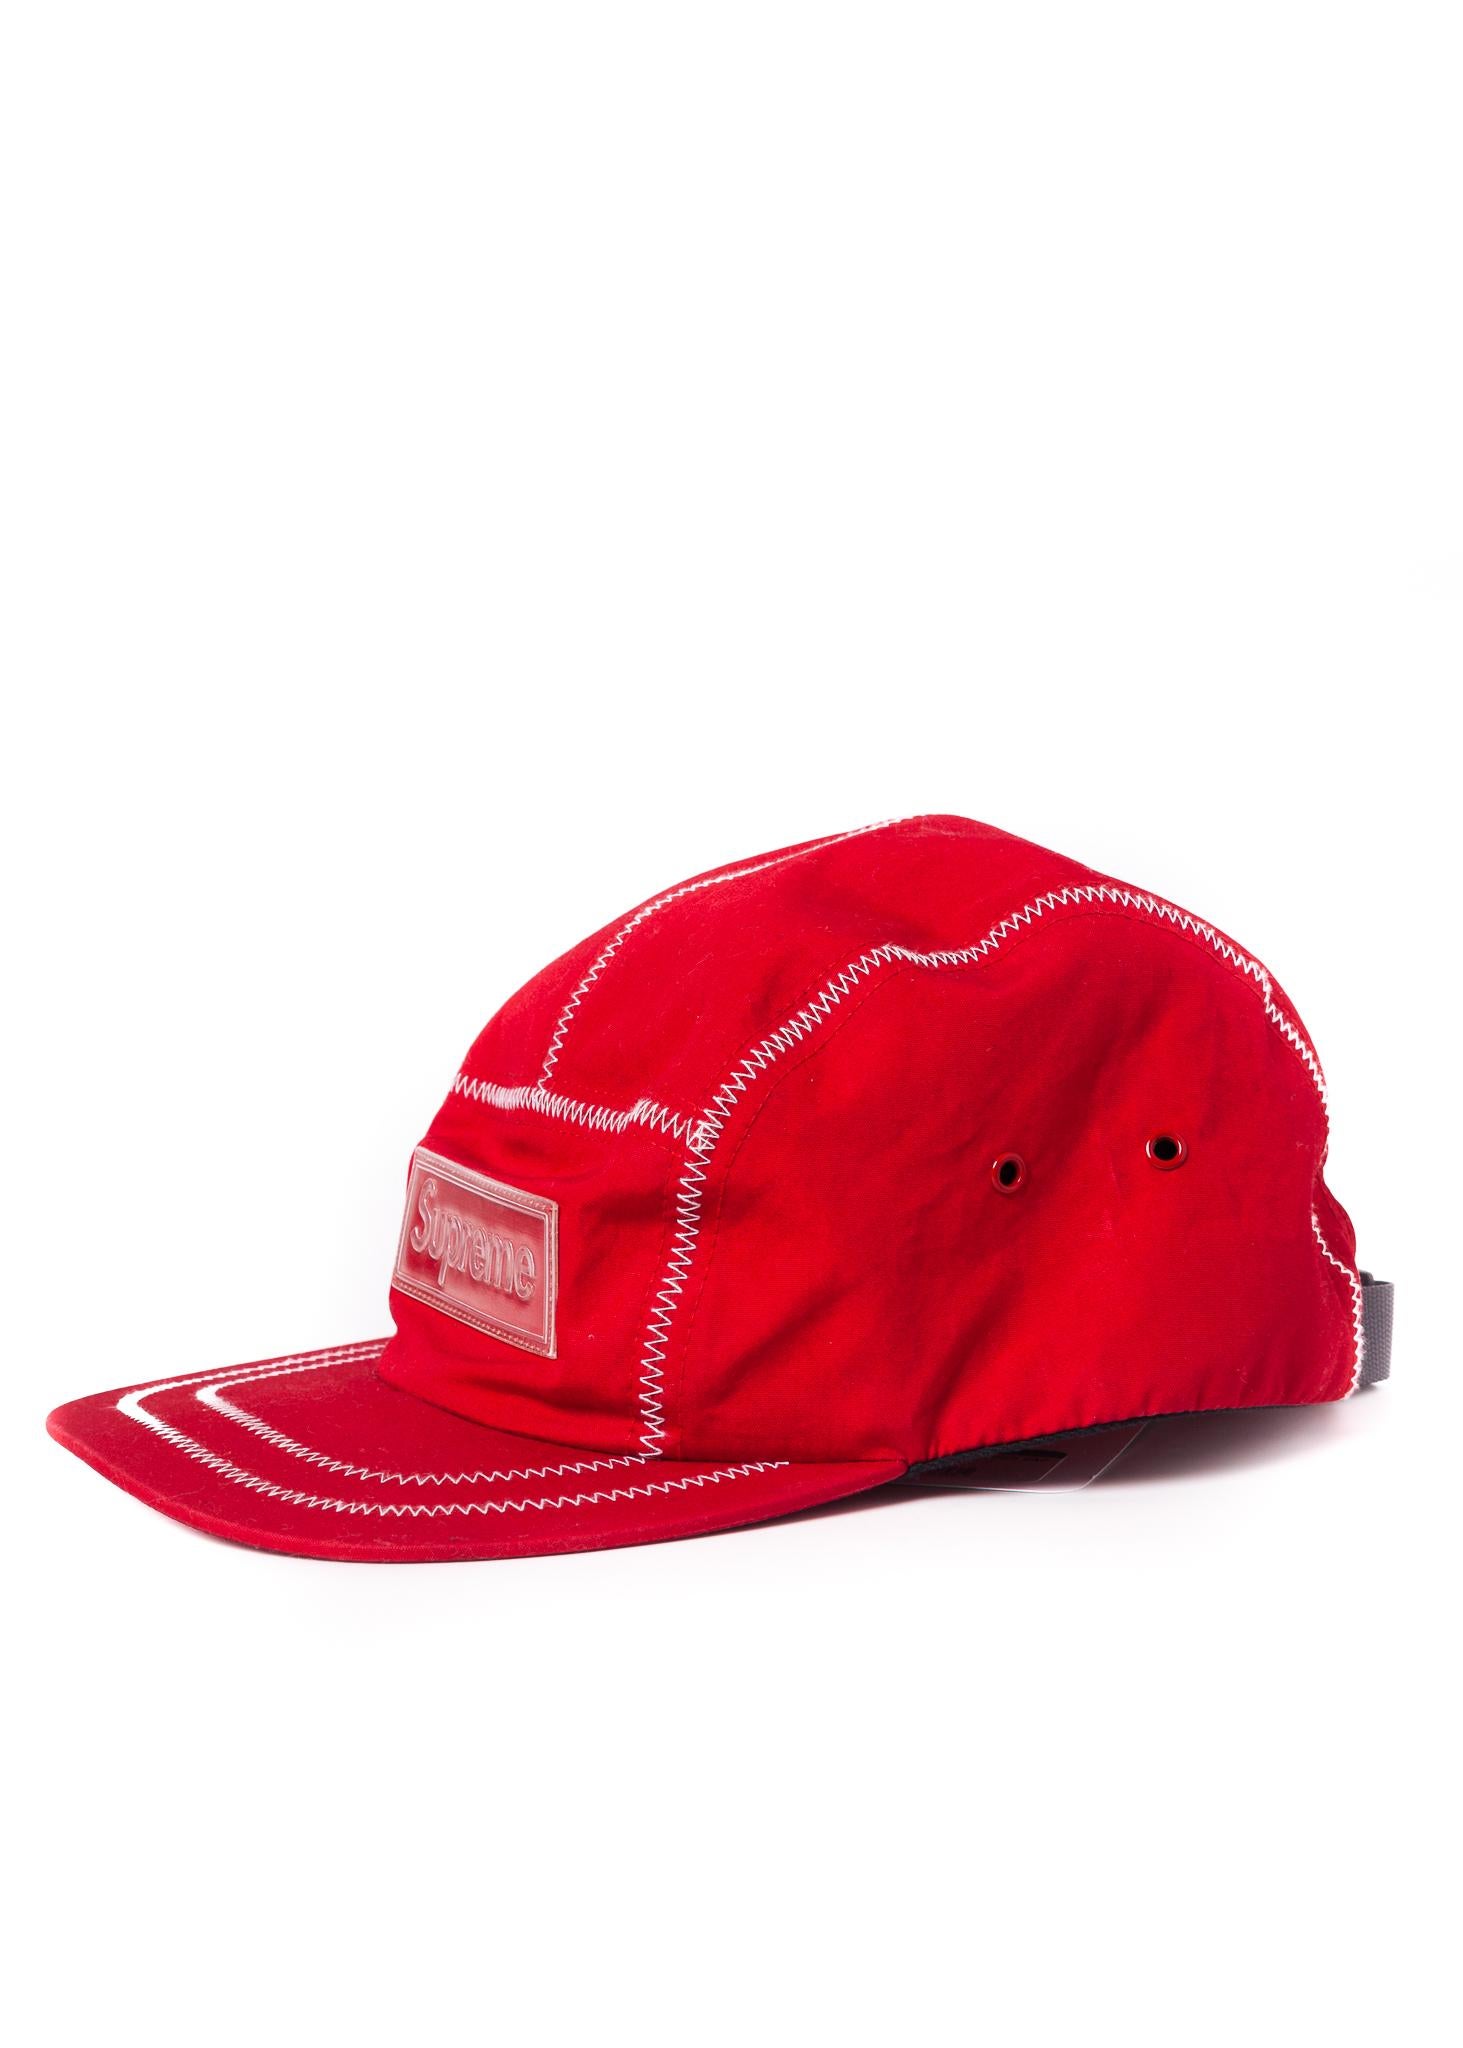 Supreme Logo cap with an adjustable fit.

COLOR: Red
MATERIAL: Cloth
SIZE: Adjustable
CONDITION: Good - hat looks pristine. Front of the hat looks adjusted to curve. Used as store display piece.